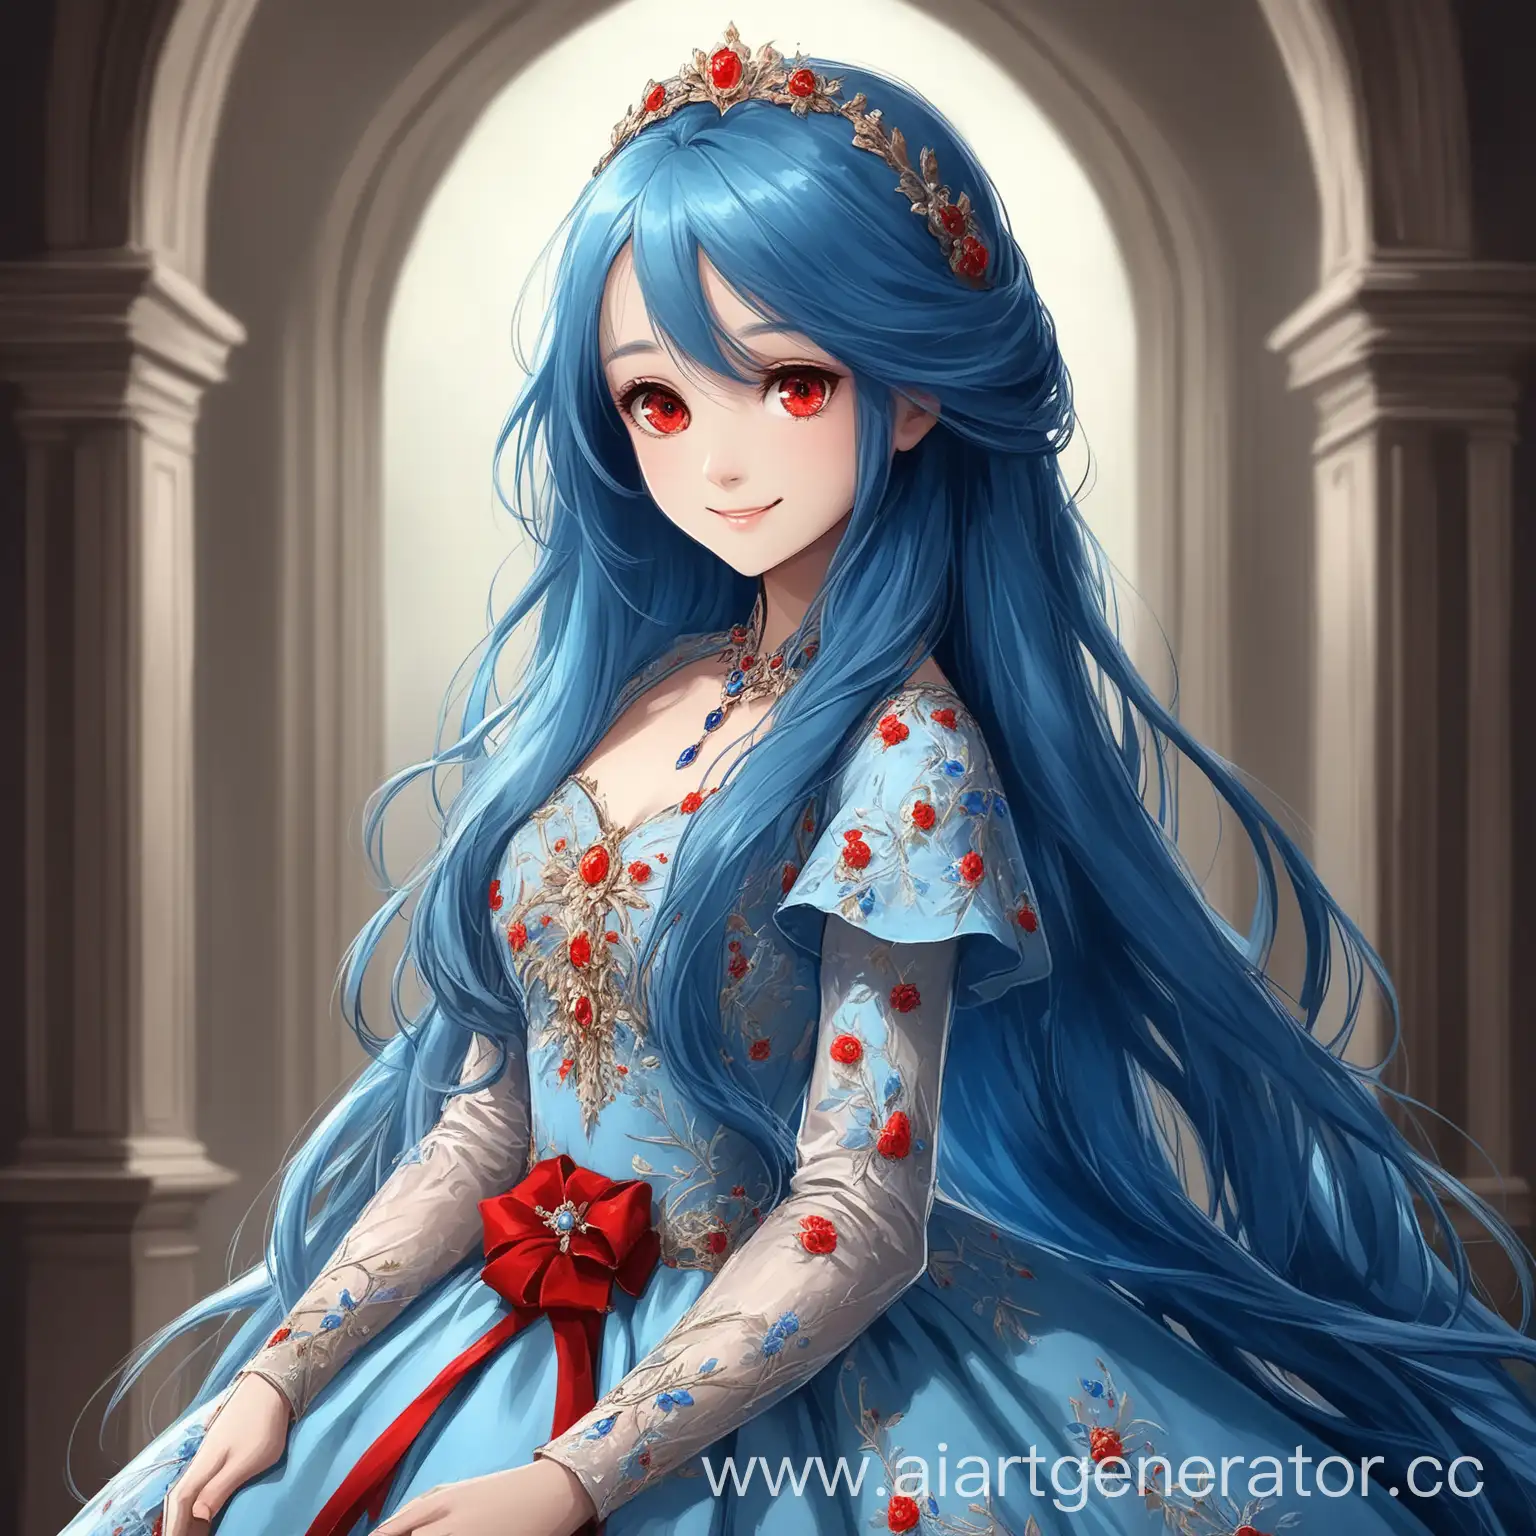 Young-Lady-with-Blue-Long-Hair-in-Beautiful-Dress-and-Kind-Smile